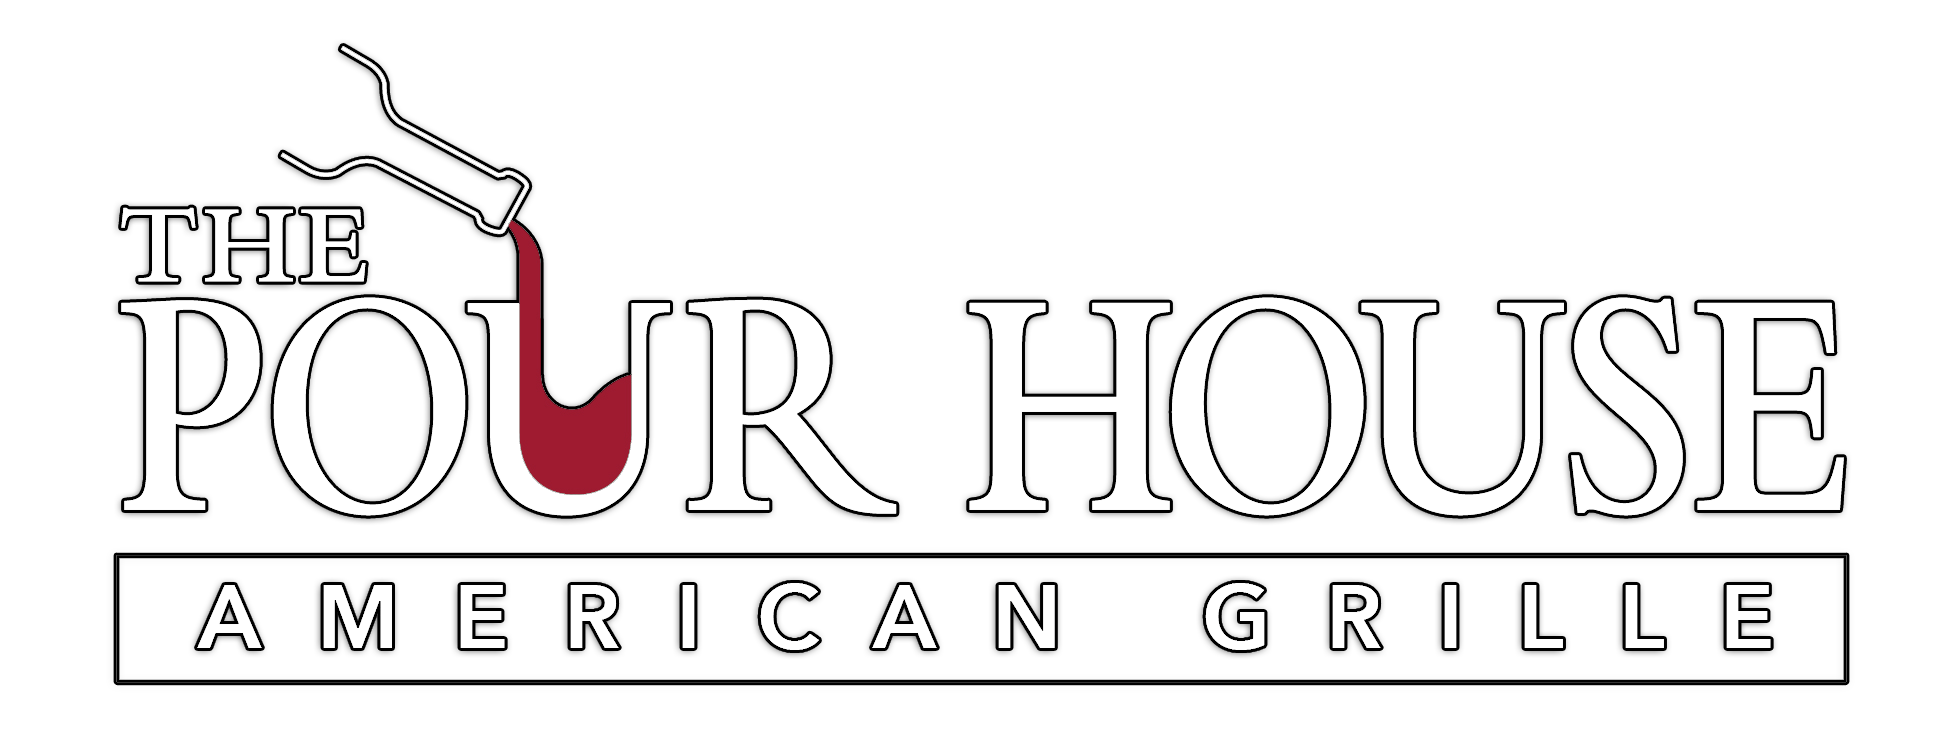 The PourHouse American Grille